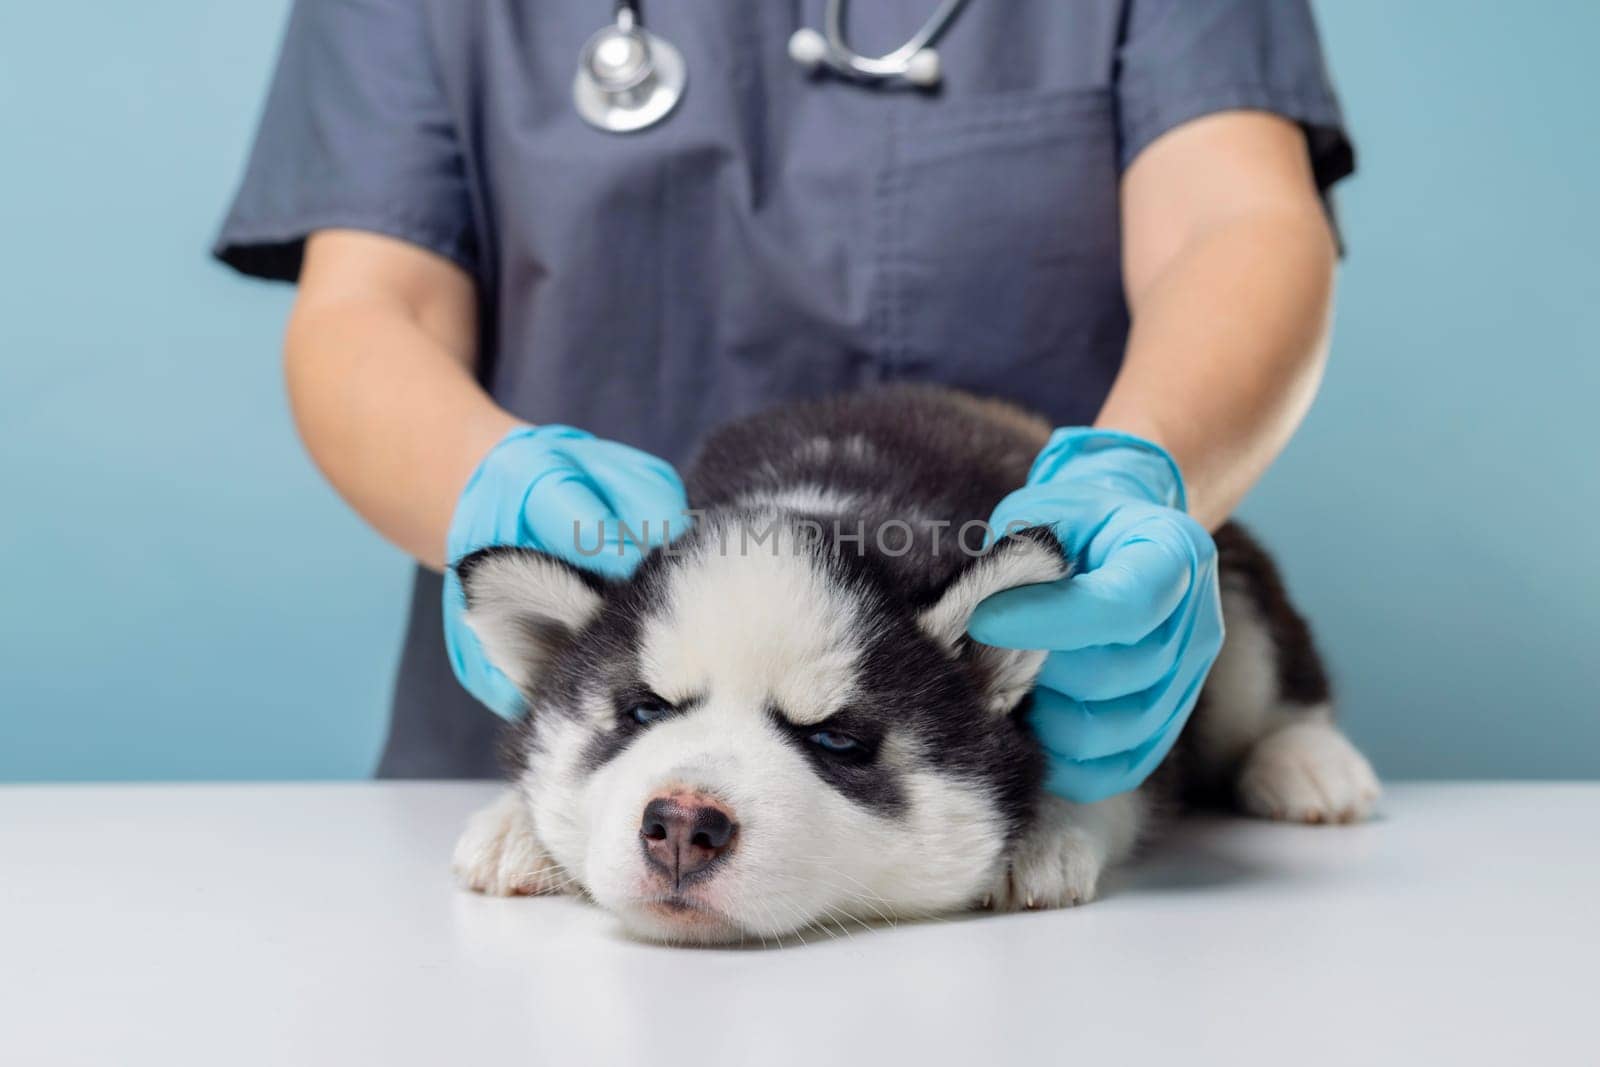 Husky puppy being examined by veterinarian, clinic interior by andreyz